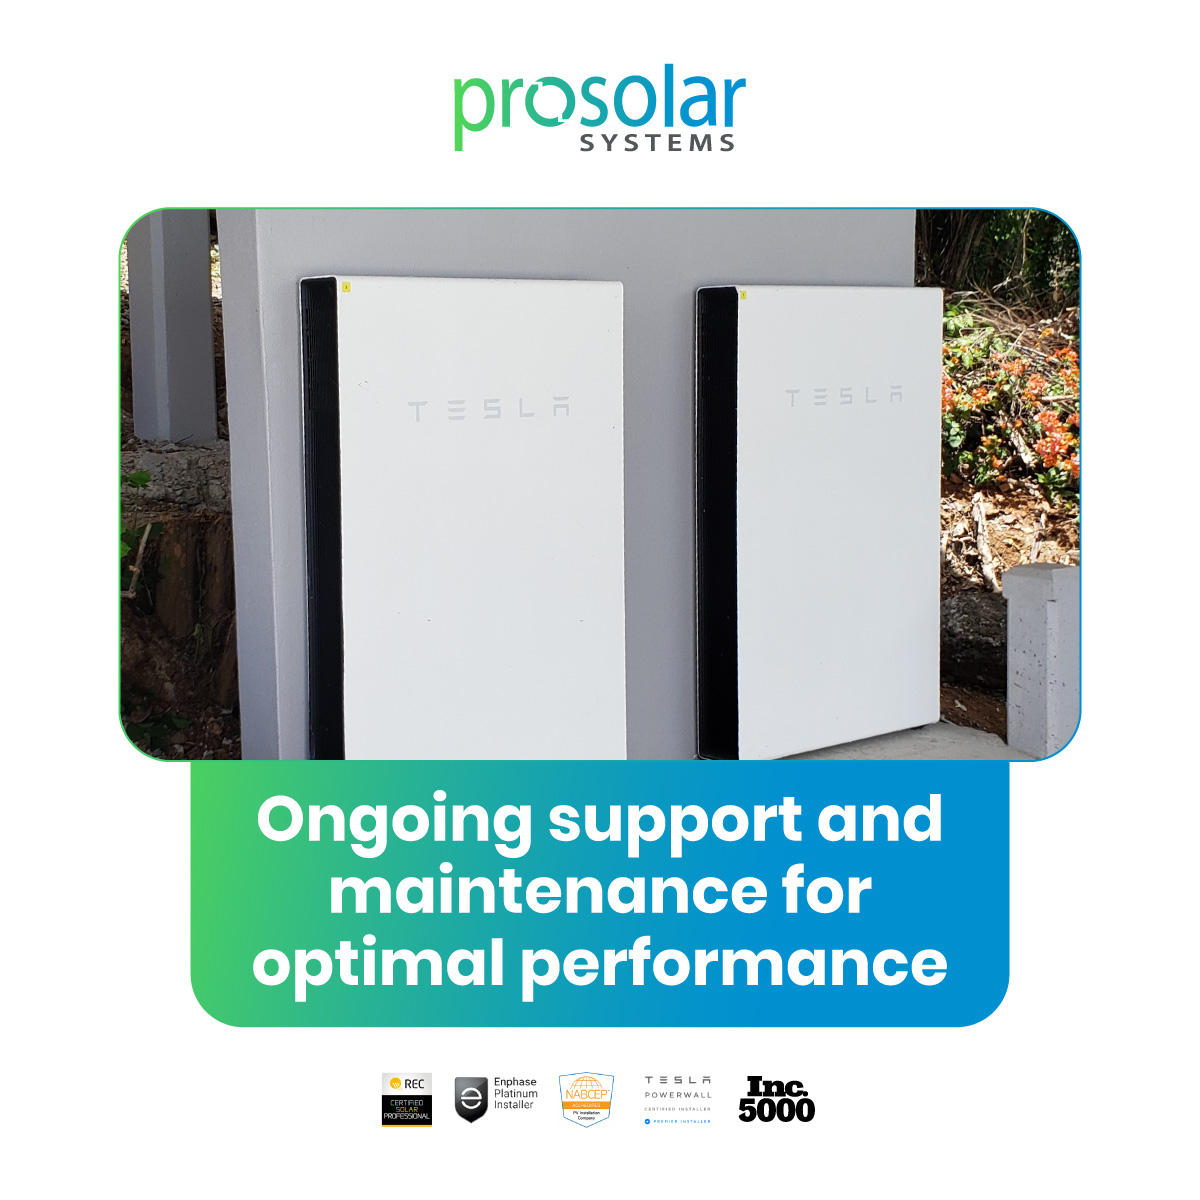 Keep your Tesla Powerwalls in top form with ProSolar Saint Croix's dedicated support and maintenance! 🌟 For peak performance and seamless energy, just head to prosolarcaribbean.com. 

#ProSolarSaintCroix #SustainableSupport #SolarPower #SolarMaintenance #EnergyEfficiency